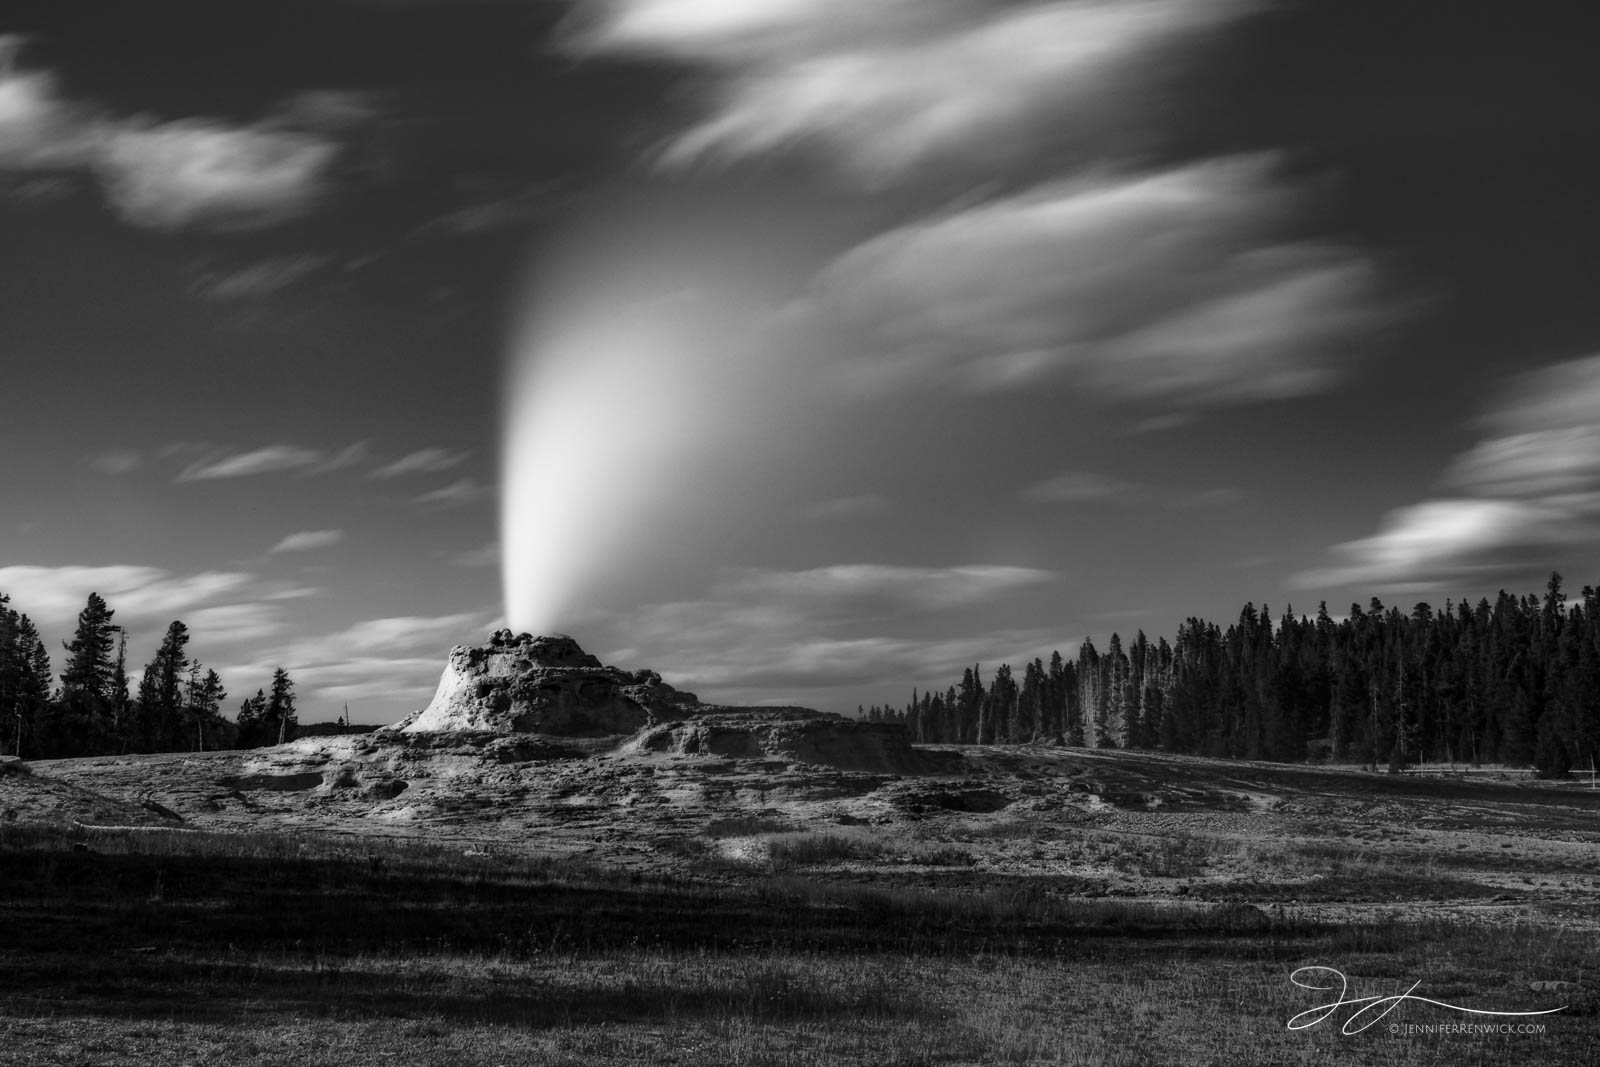 Castle Geyser erupts on a partly cloudy day in the Upper Geyser Basin. This image was photographed using a longer exposure to...